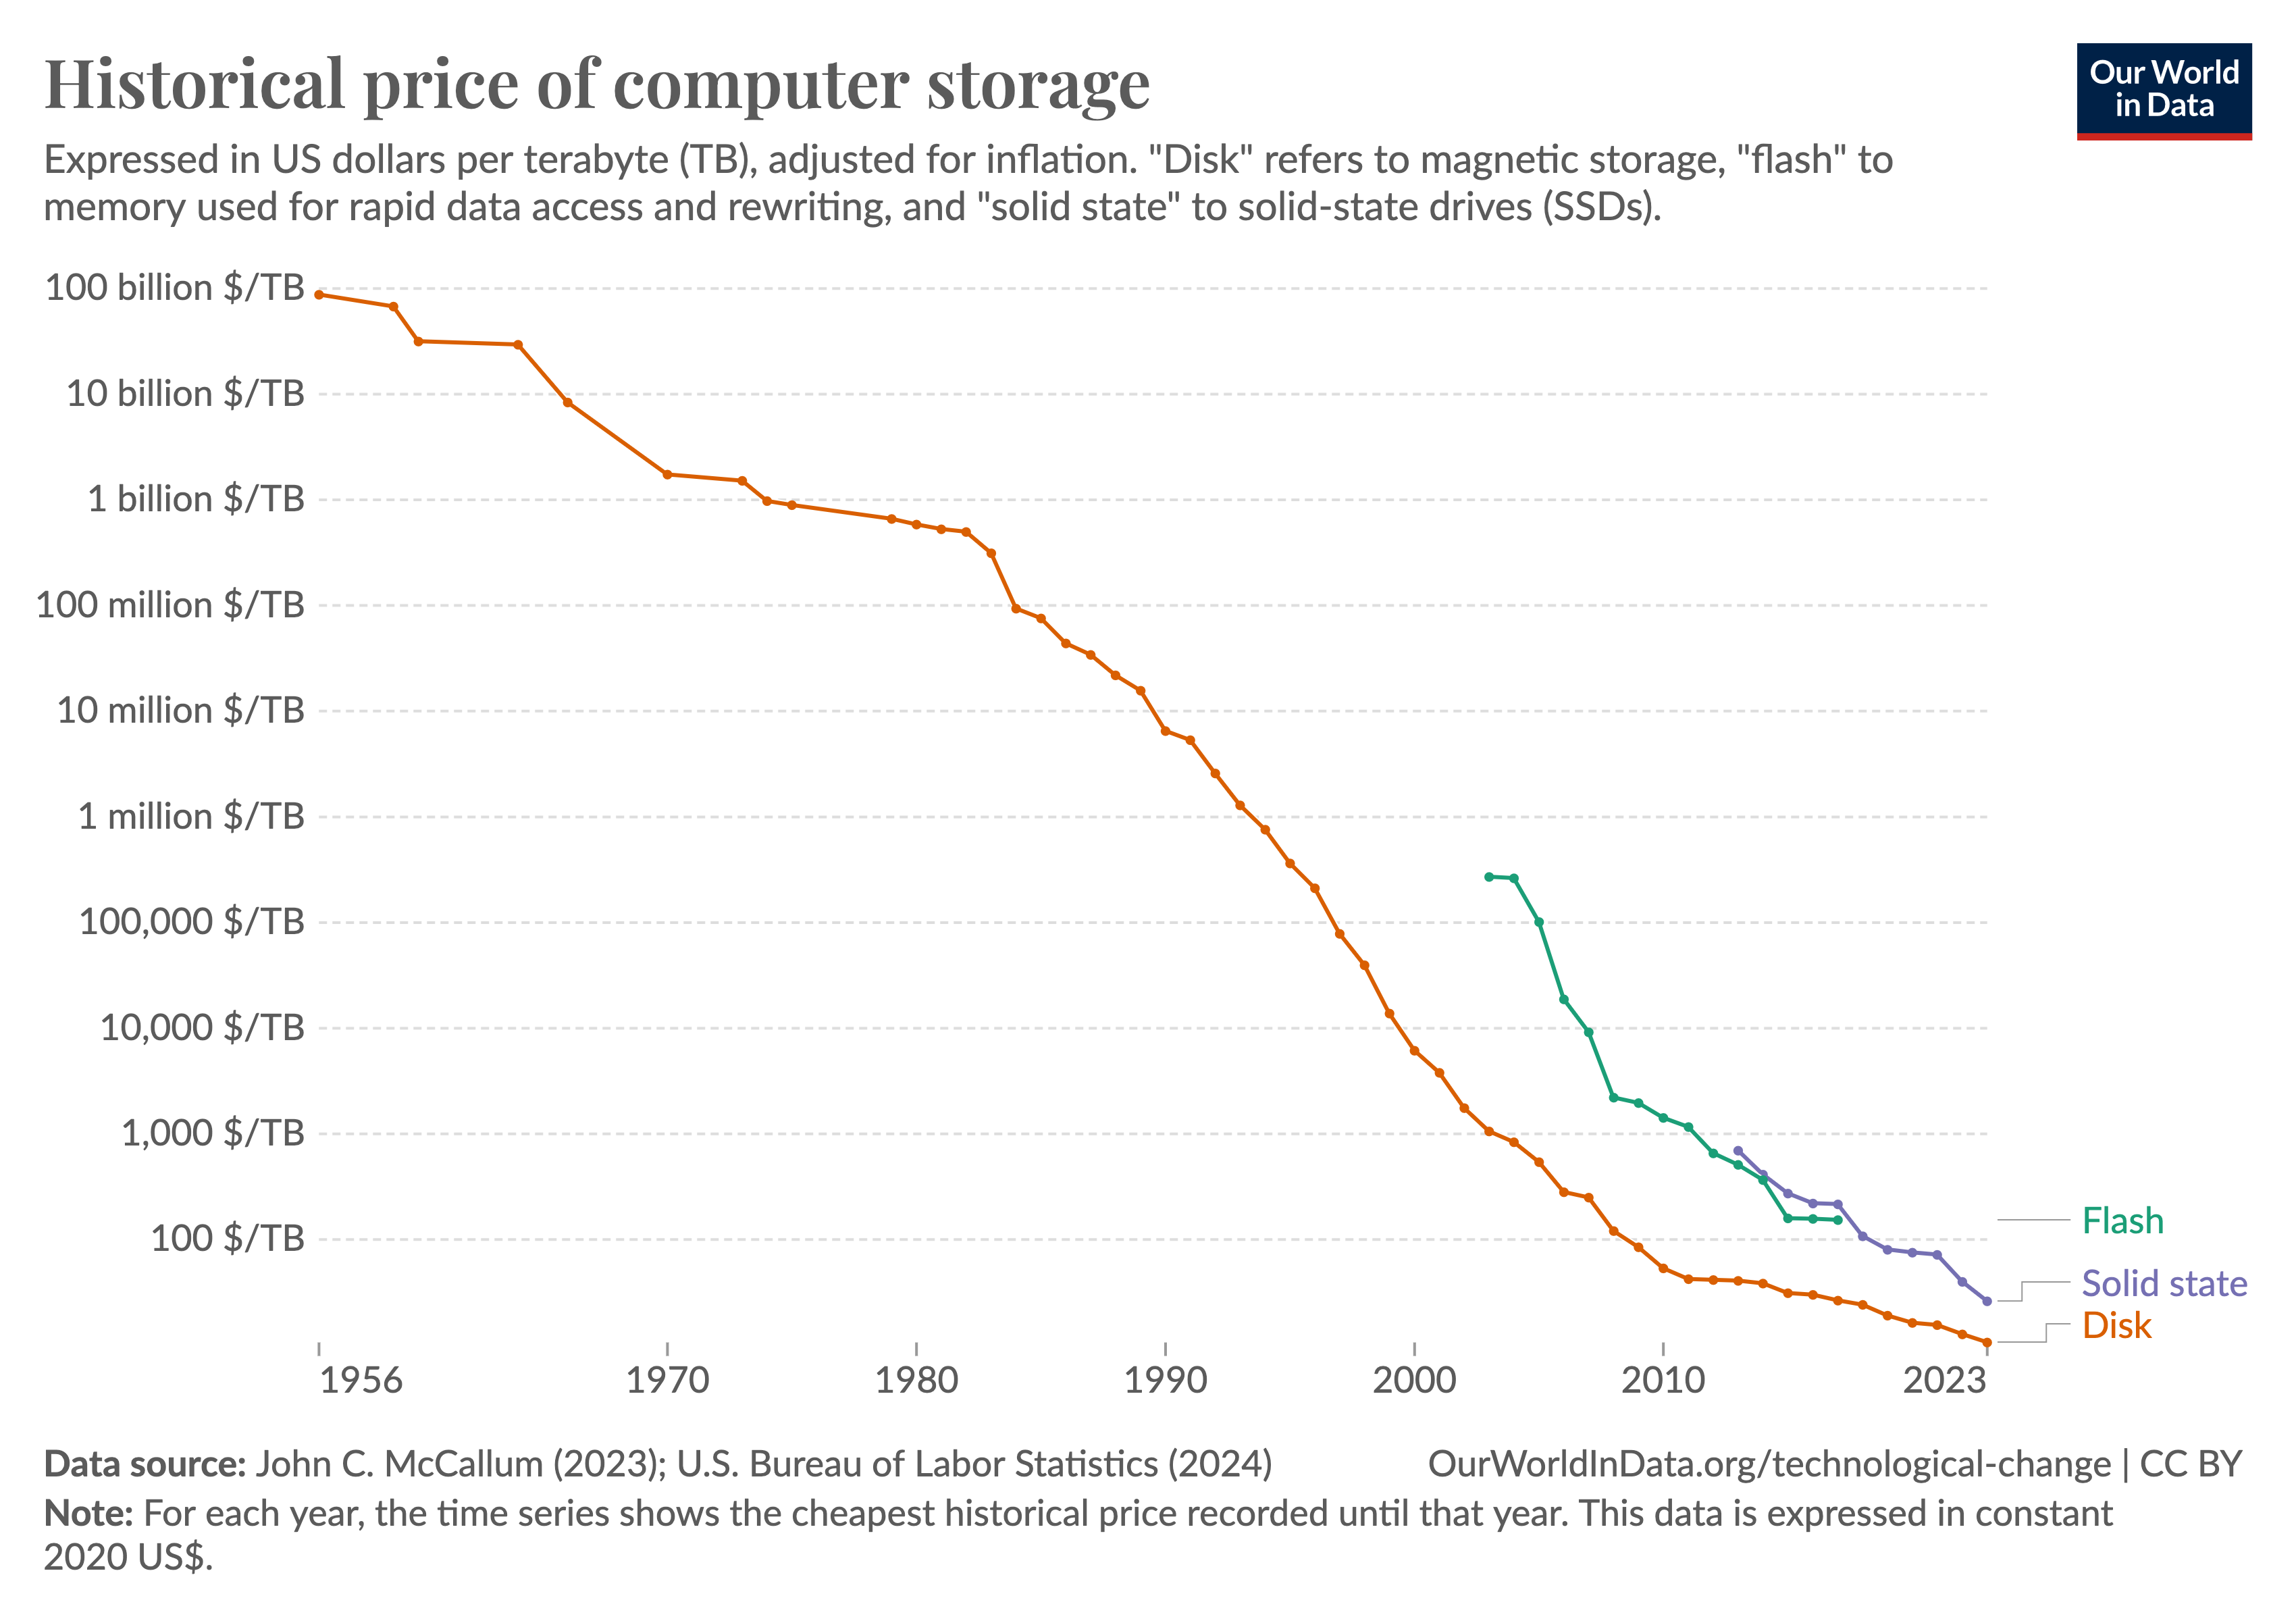 Line graph depicting the historical price of computer storage from 1956 to 2023. The y-axis represents the price in US dollars per terabyte on a logarithmic scale, ranging from 10 billion dollars to 100 dollars per TB. The x-axis represents the years from 1956 to 2023. Three lines represent different types of storage technologies: 'Disk' in orange, 'Solid State' in purple, and 'Flash' in green. The orange line starts from the highest price in 1956 and shows a steep decline over the decades. The purple and green lines start later in the timeline, around the late 1990s and early 2000s, respectively, both beginning at lower prices than the disk and following a similar downward trend.